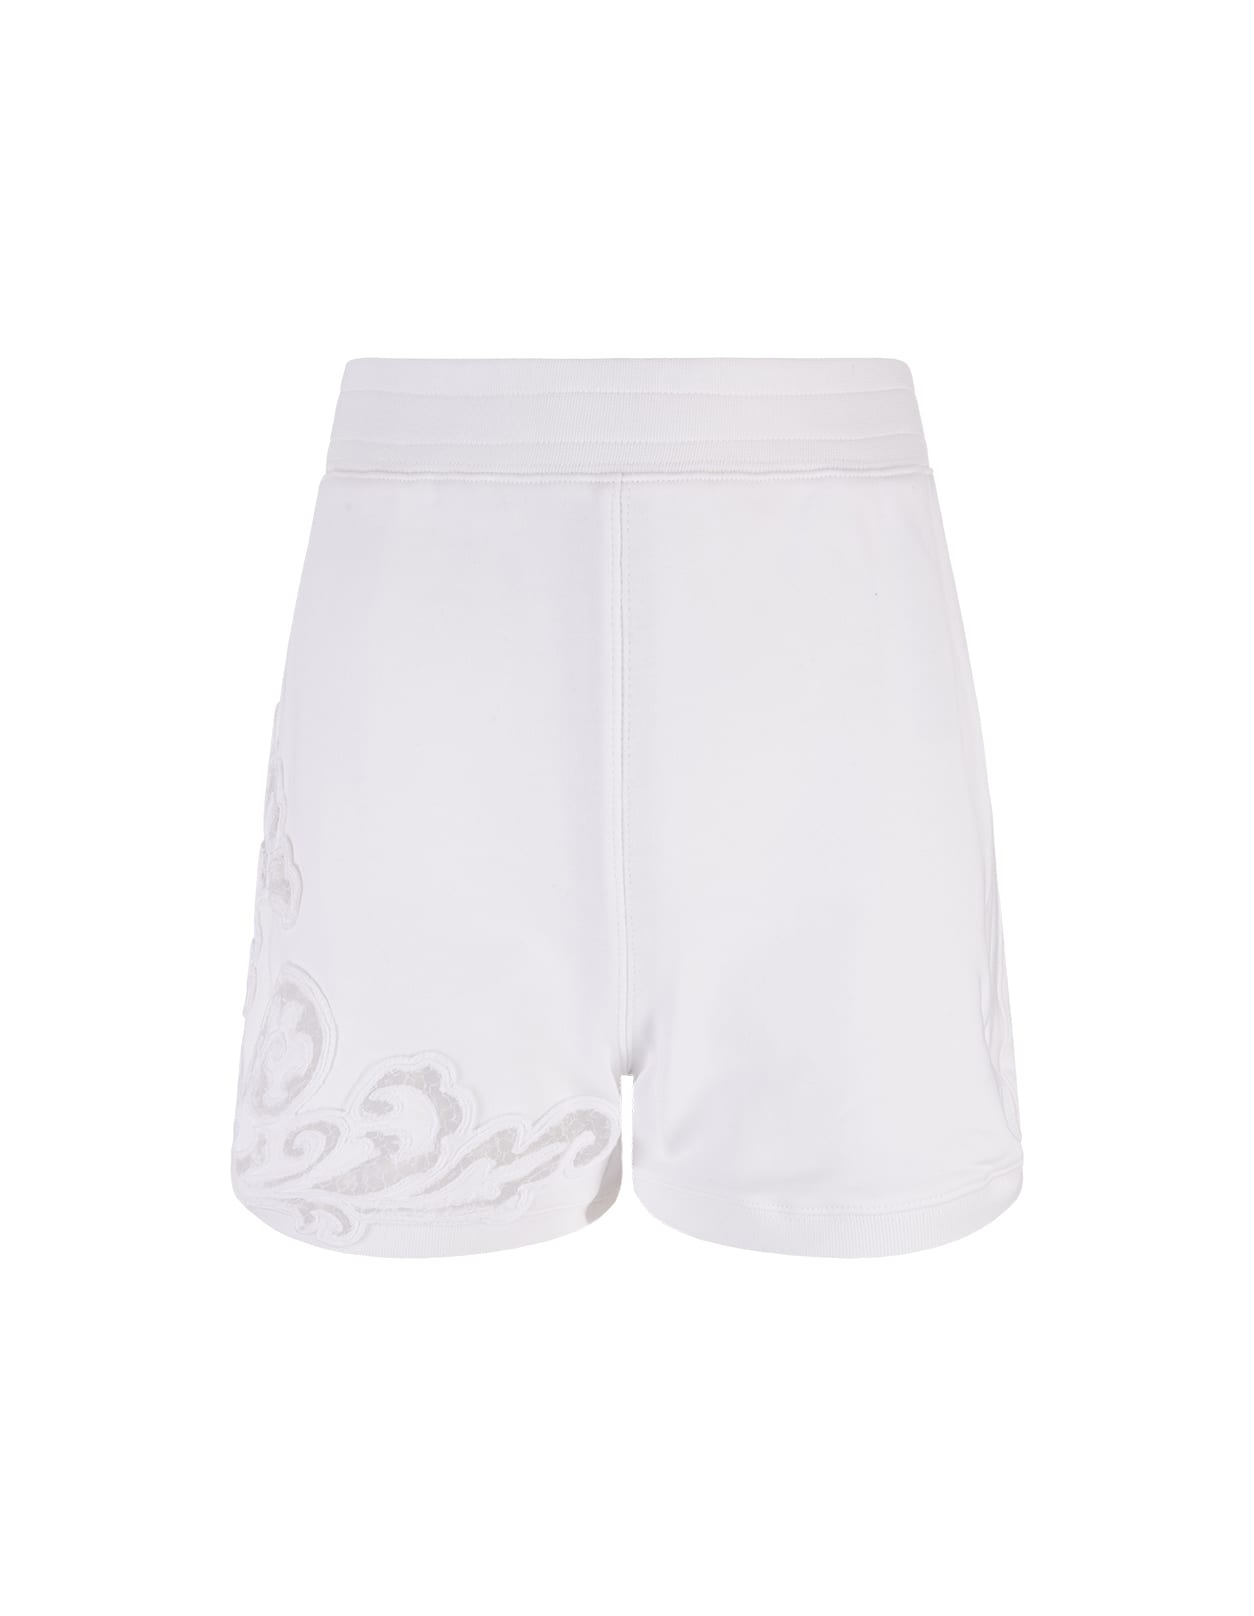 ERMANNO SCERVINO WHITE SPORTS SHORTS WITH EMBROIDERY